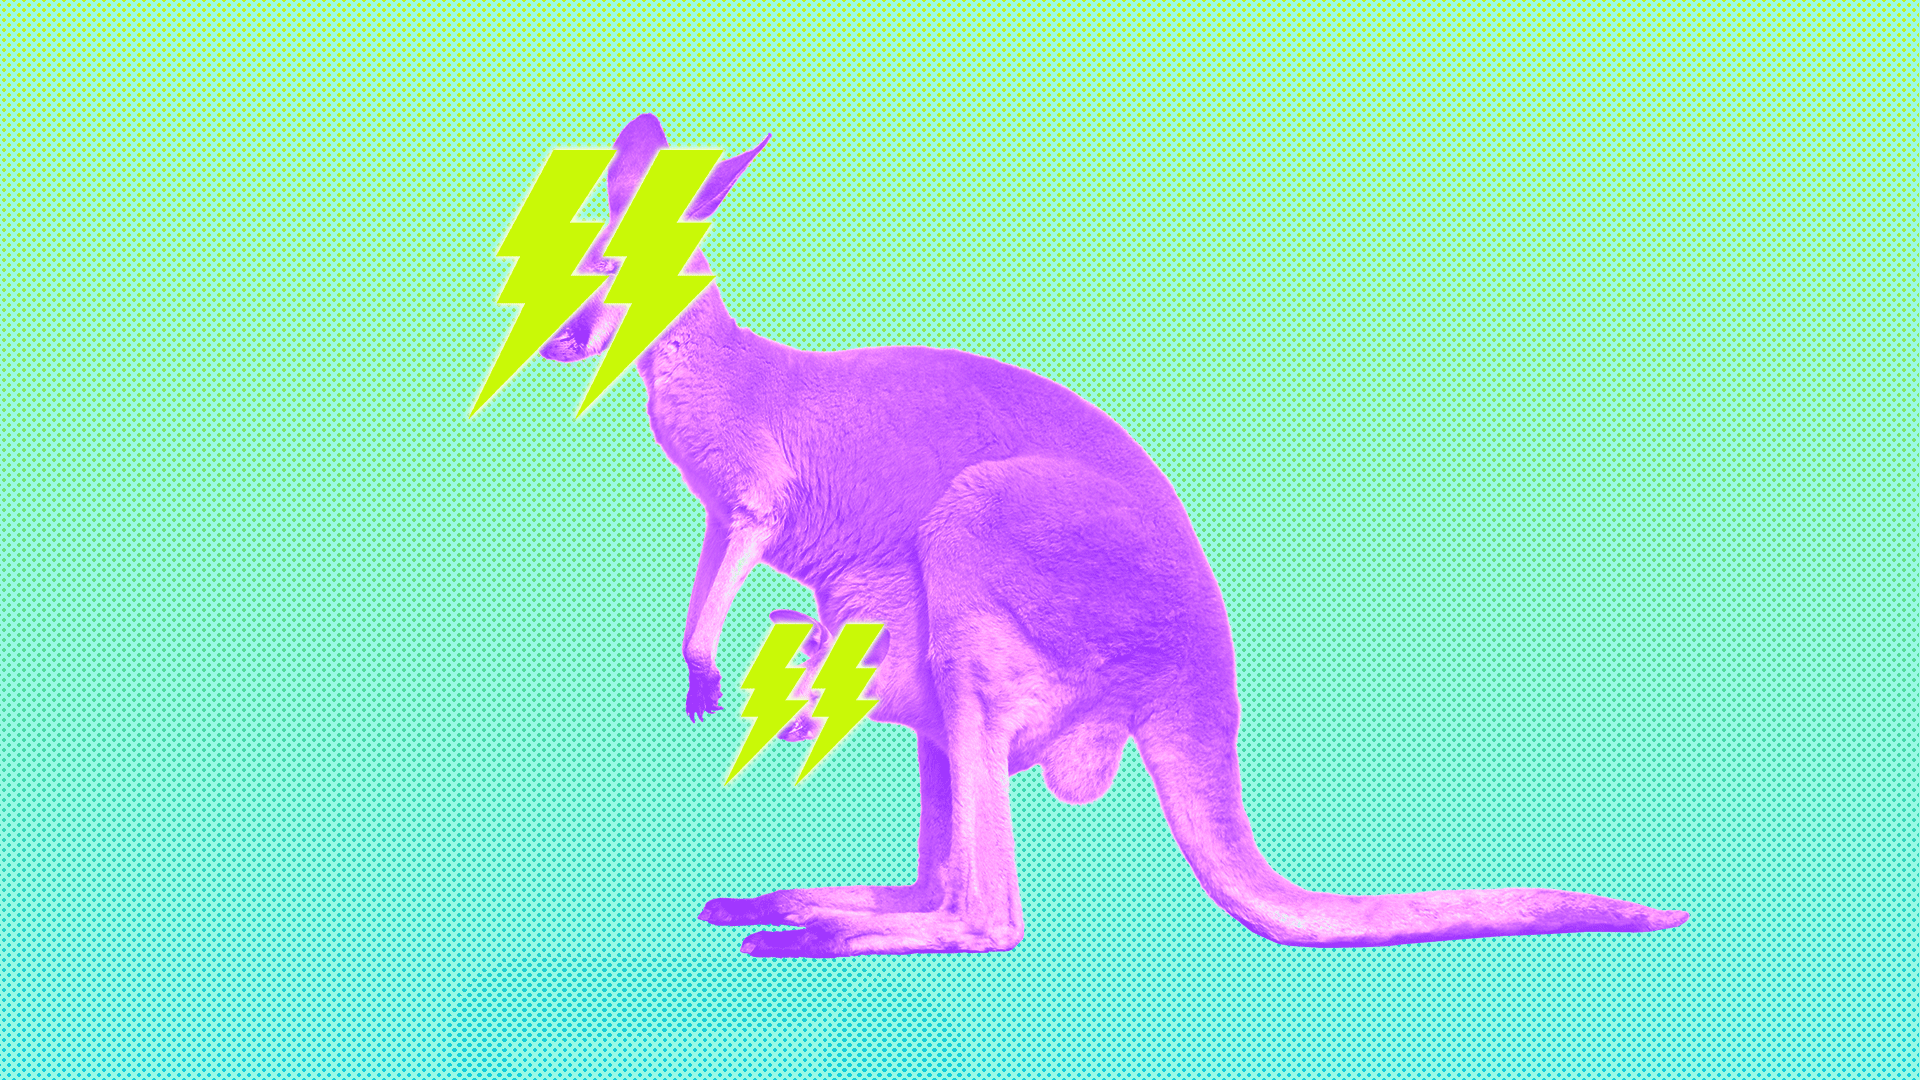 An animated GIF of kangaroos with lightning bolts for eyes